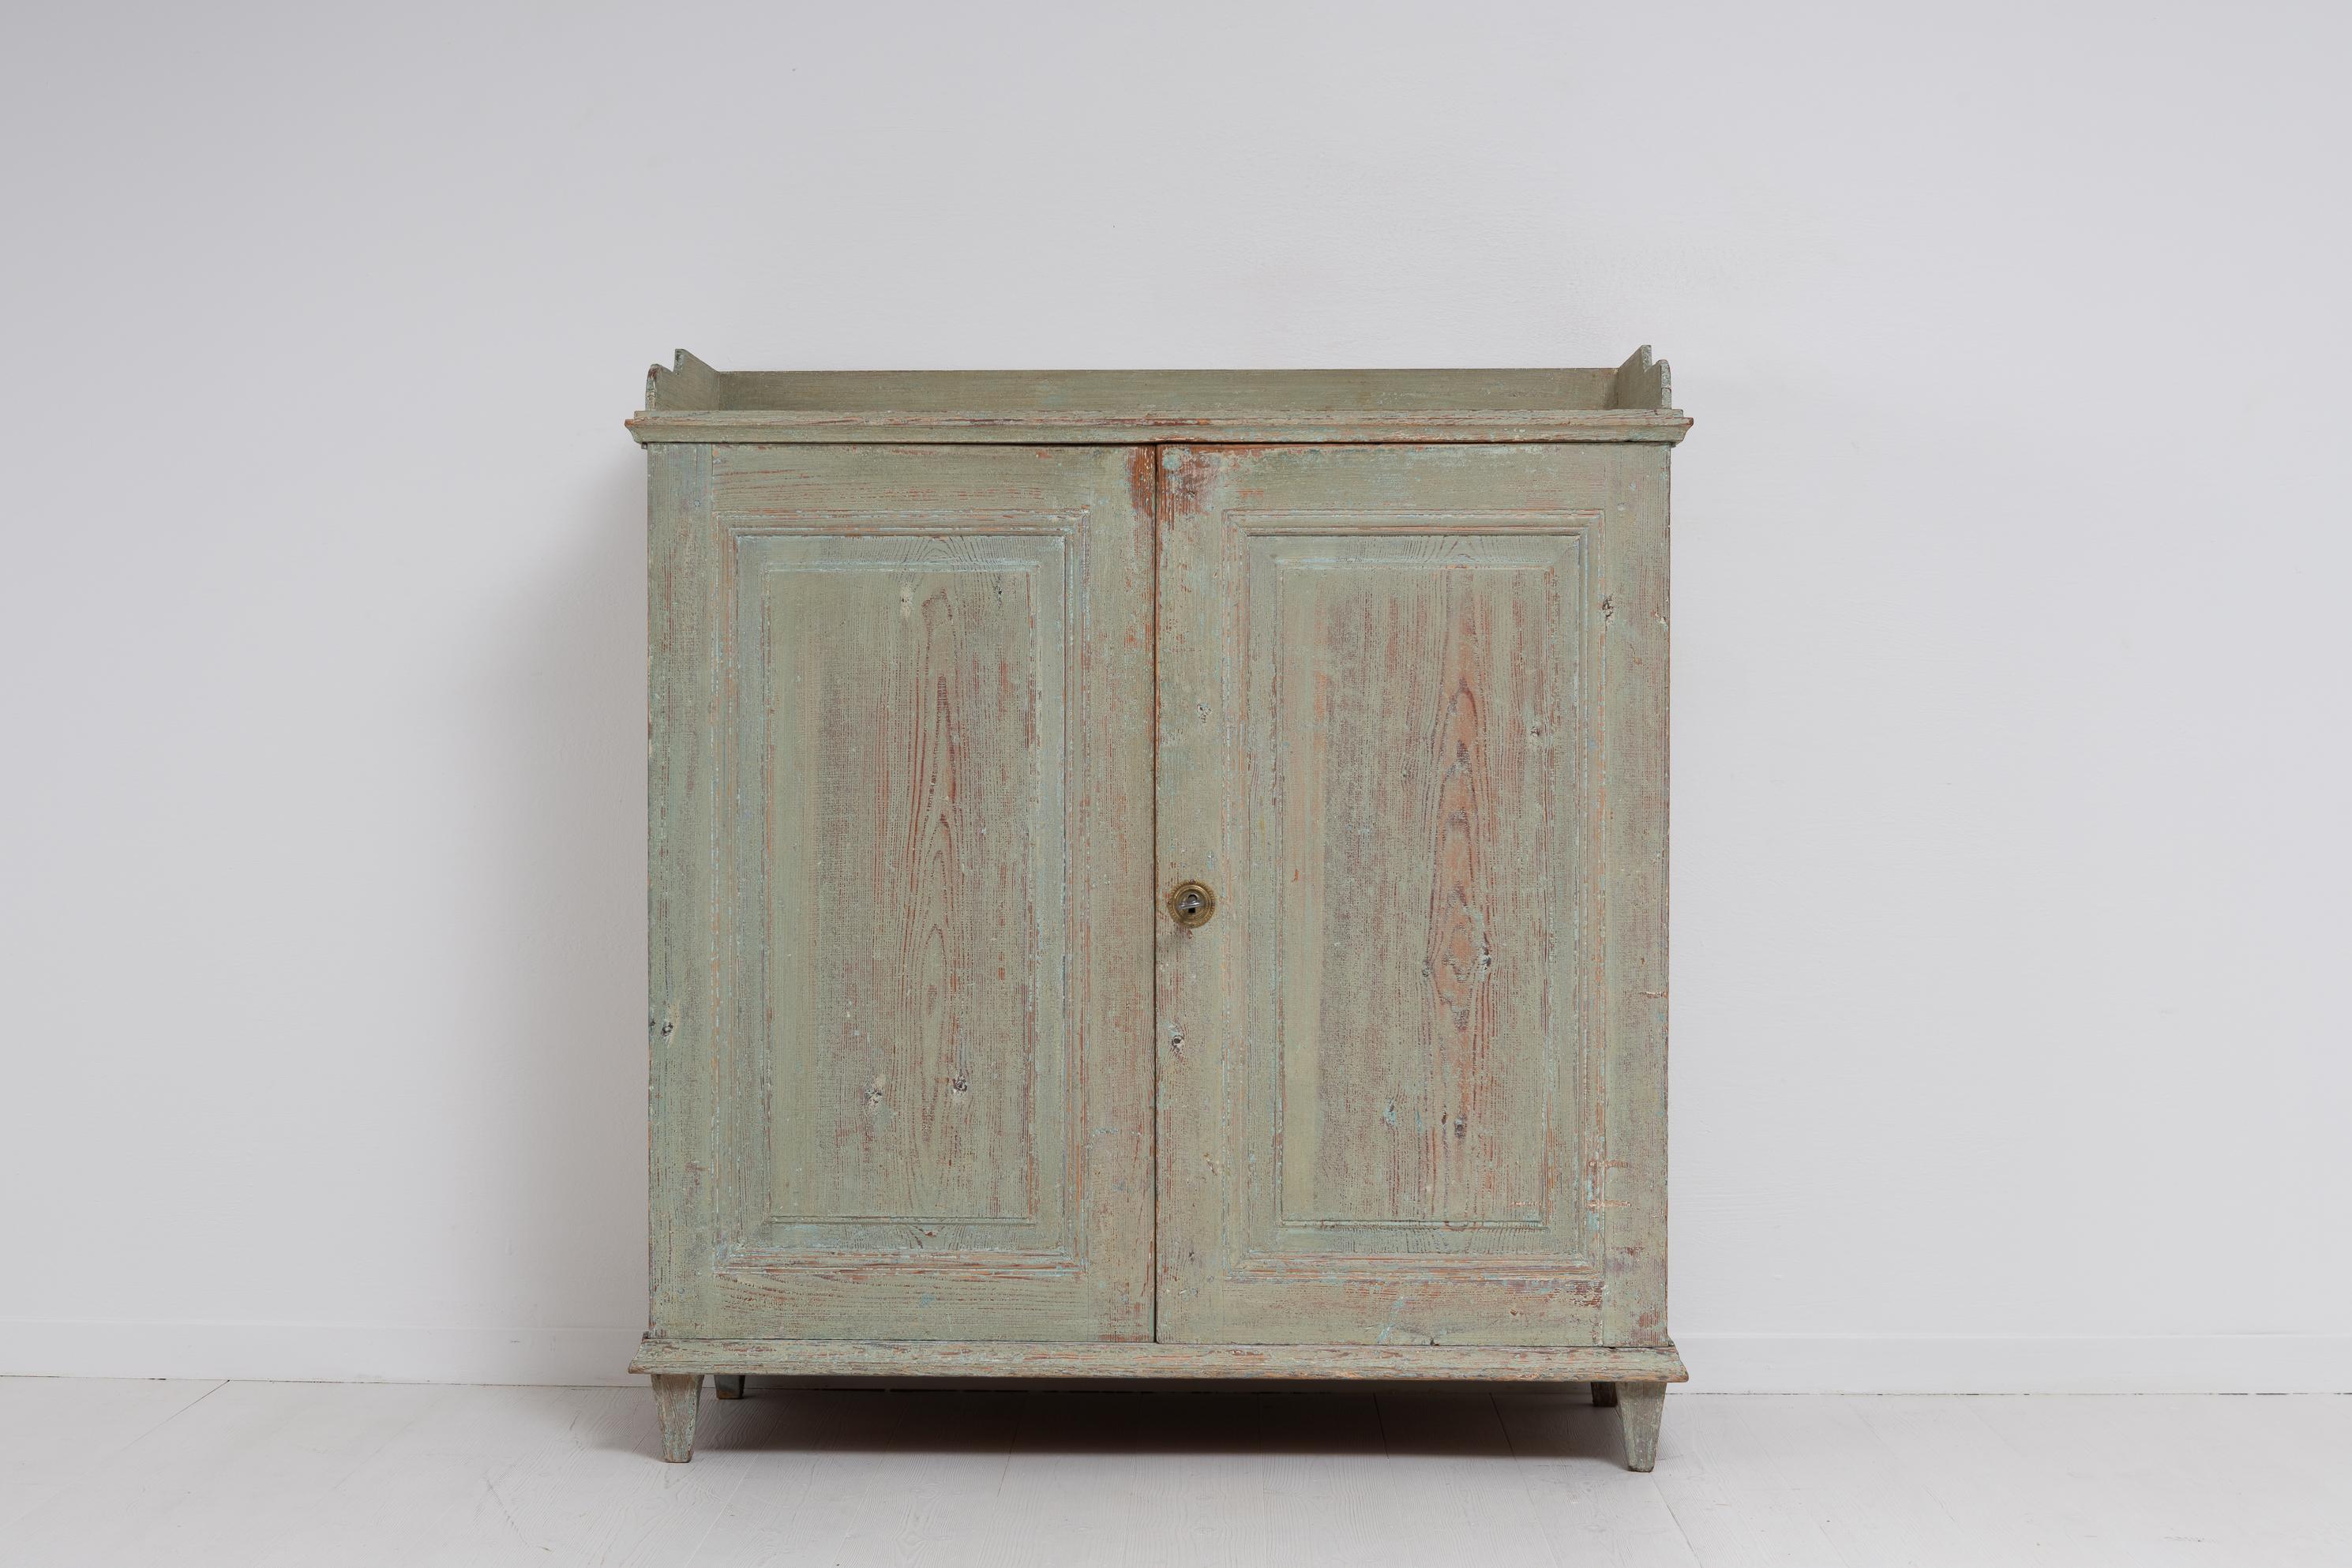 Northern Swedish classic straight gustavian sideboard. The sideboard is from the late 1700s to early 1800s, between 1780 and 1810. Made in a classic straight shape typical to the gustavian period with 3 interior drawers and shelves. Dry scraped by